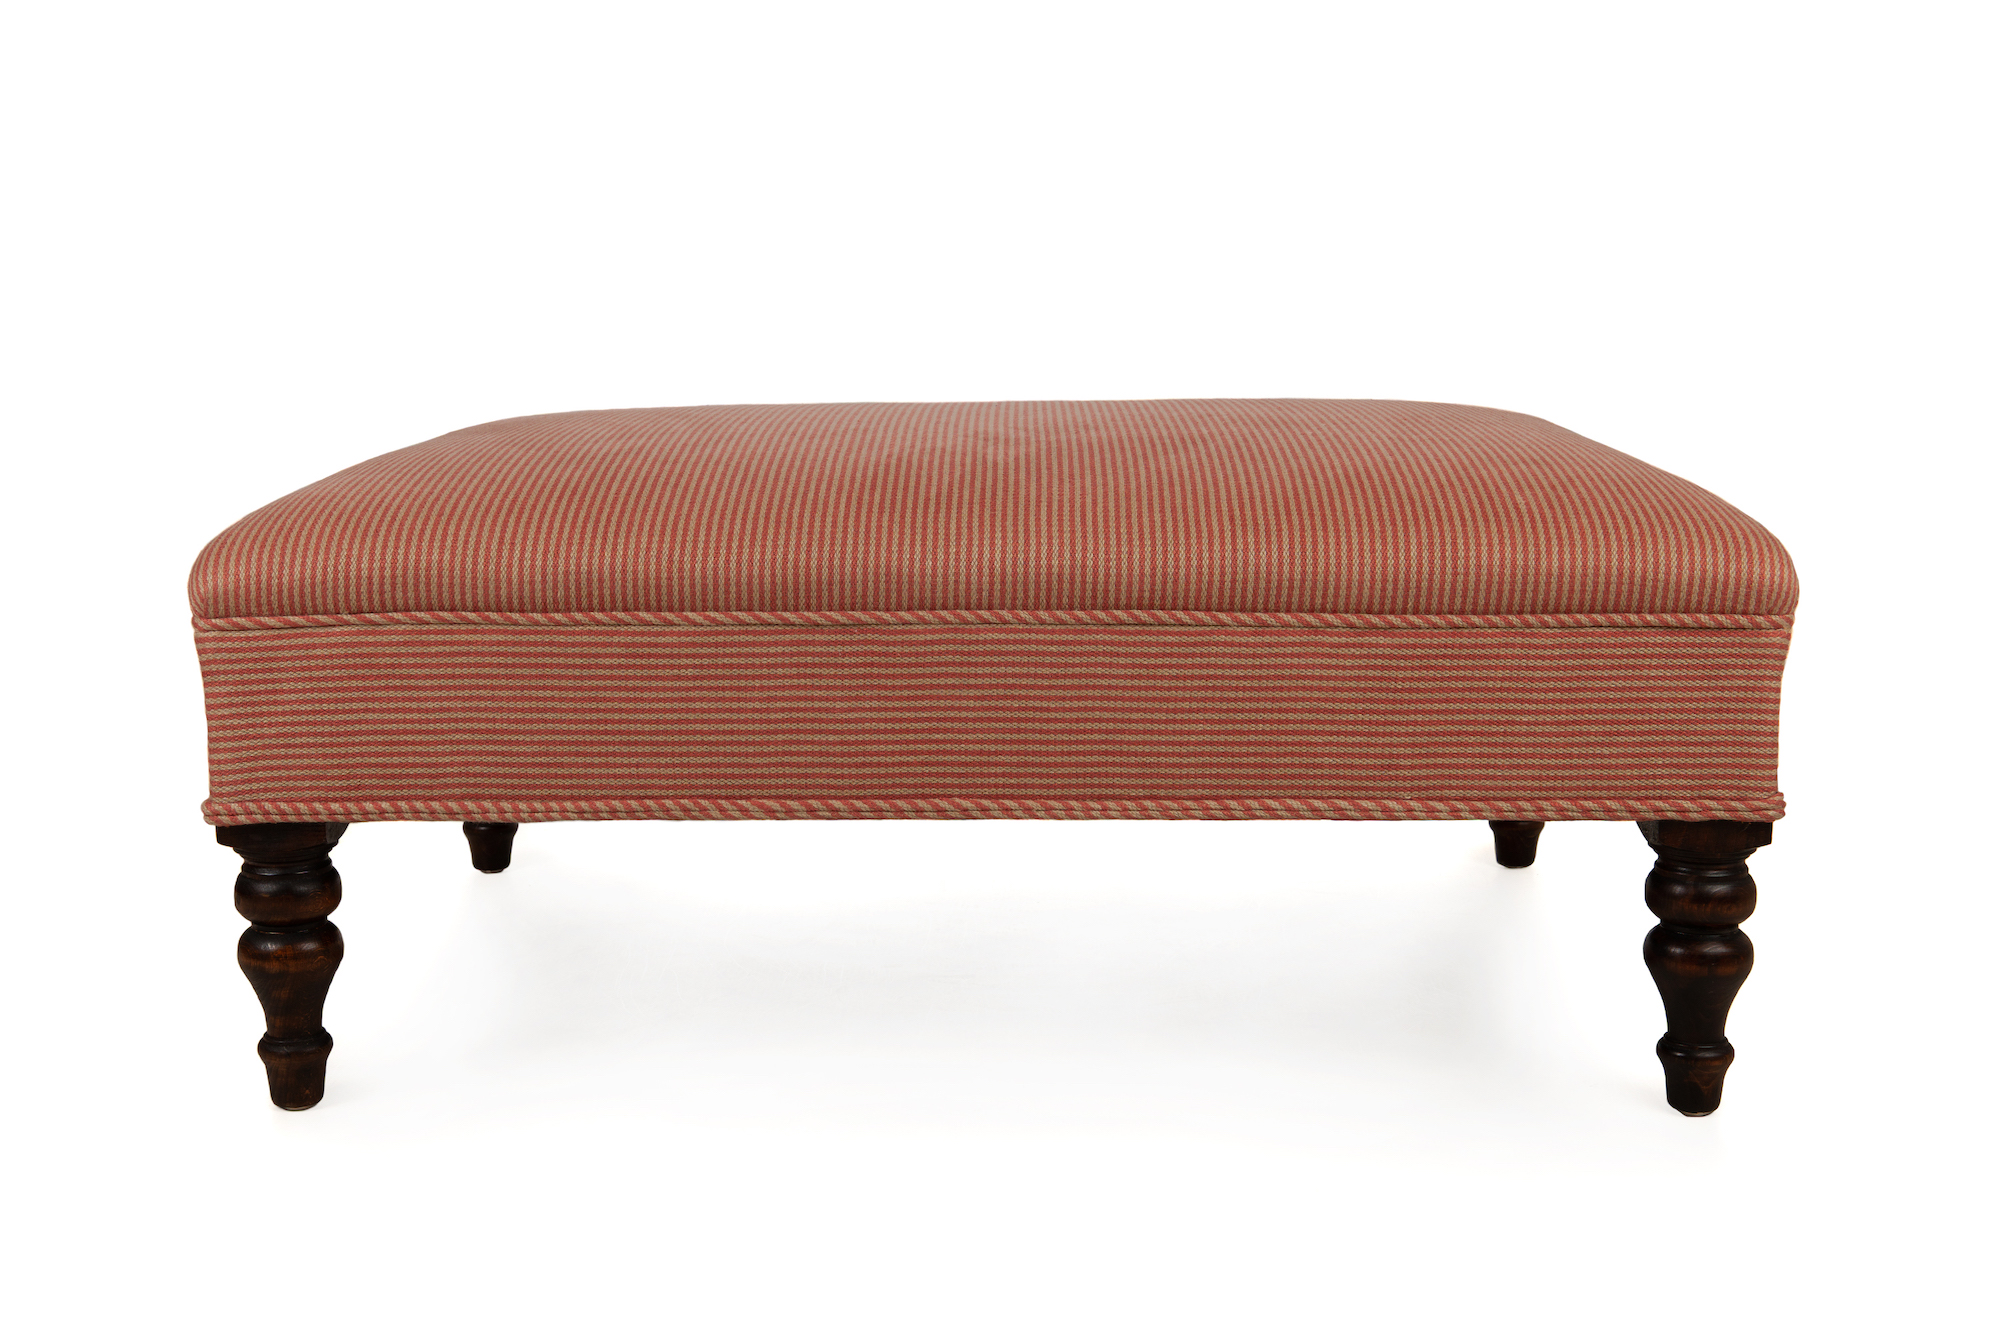 Pin-stripe Footstool Double Piping and Piping Trim with Turned Legs